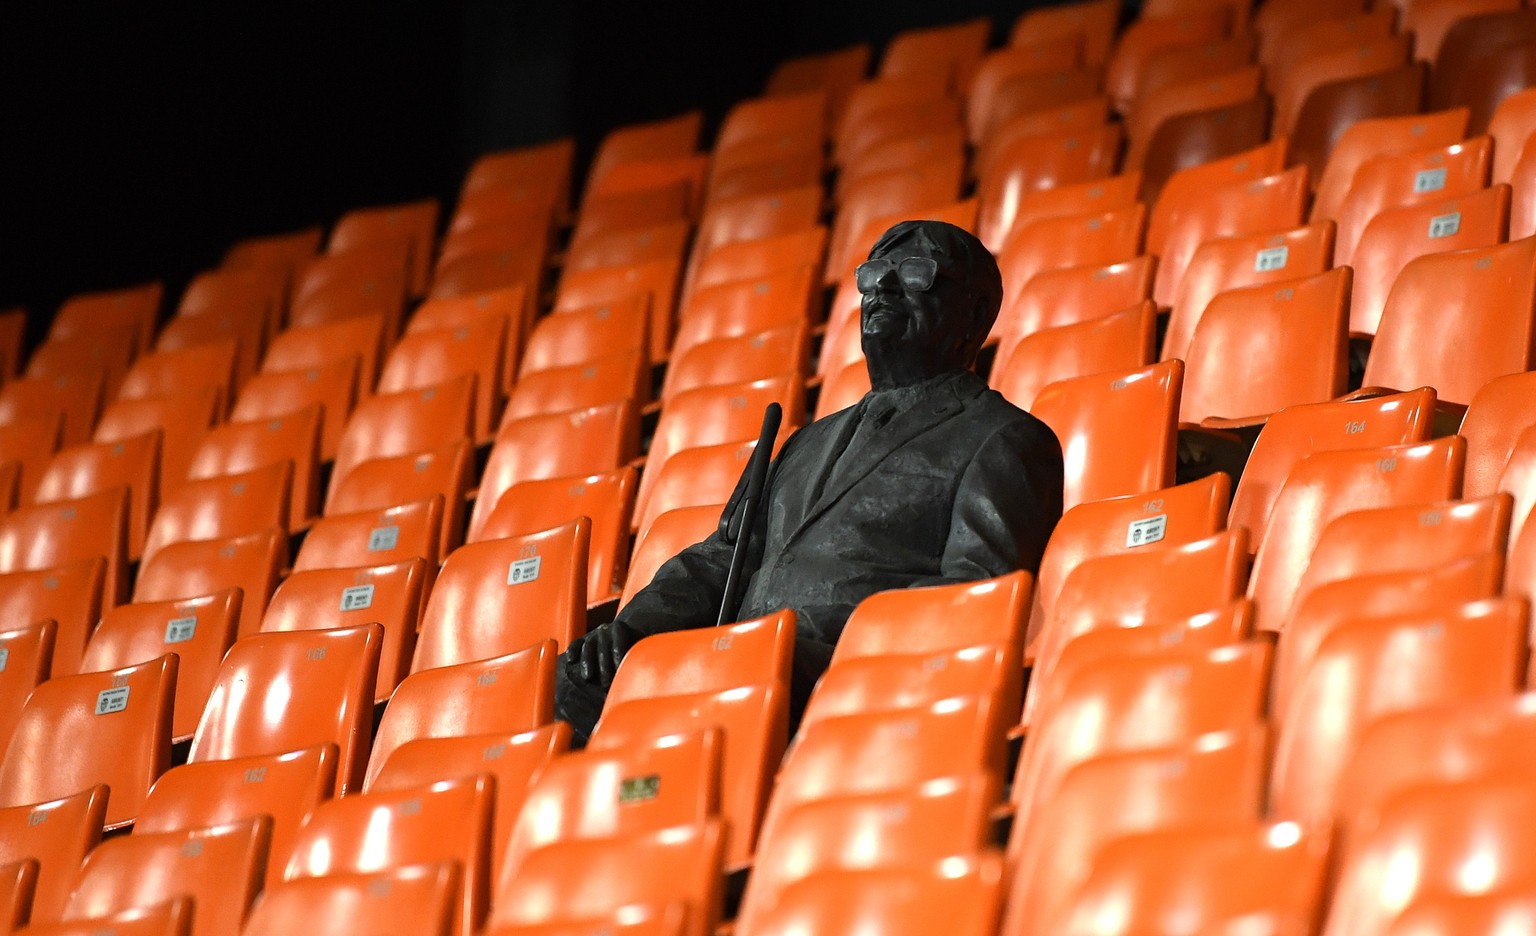 epa08284359 A handout image provided by UEFA shows a statue in the stands representing a former fan ahead of the UEFA Champions League round of 16 second leg match between Valencia CF and Atalanta BC  ...